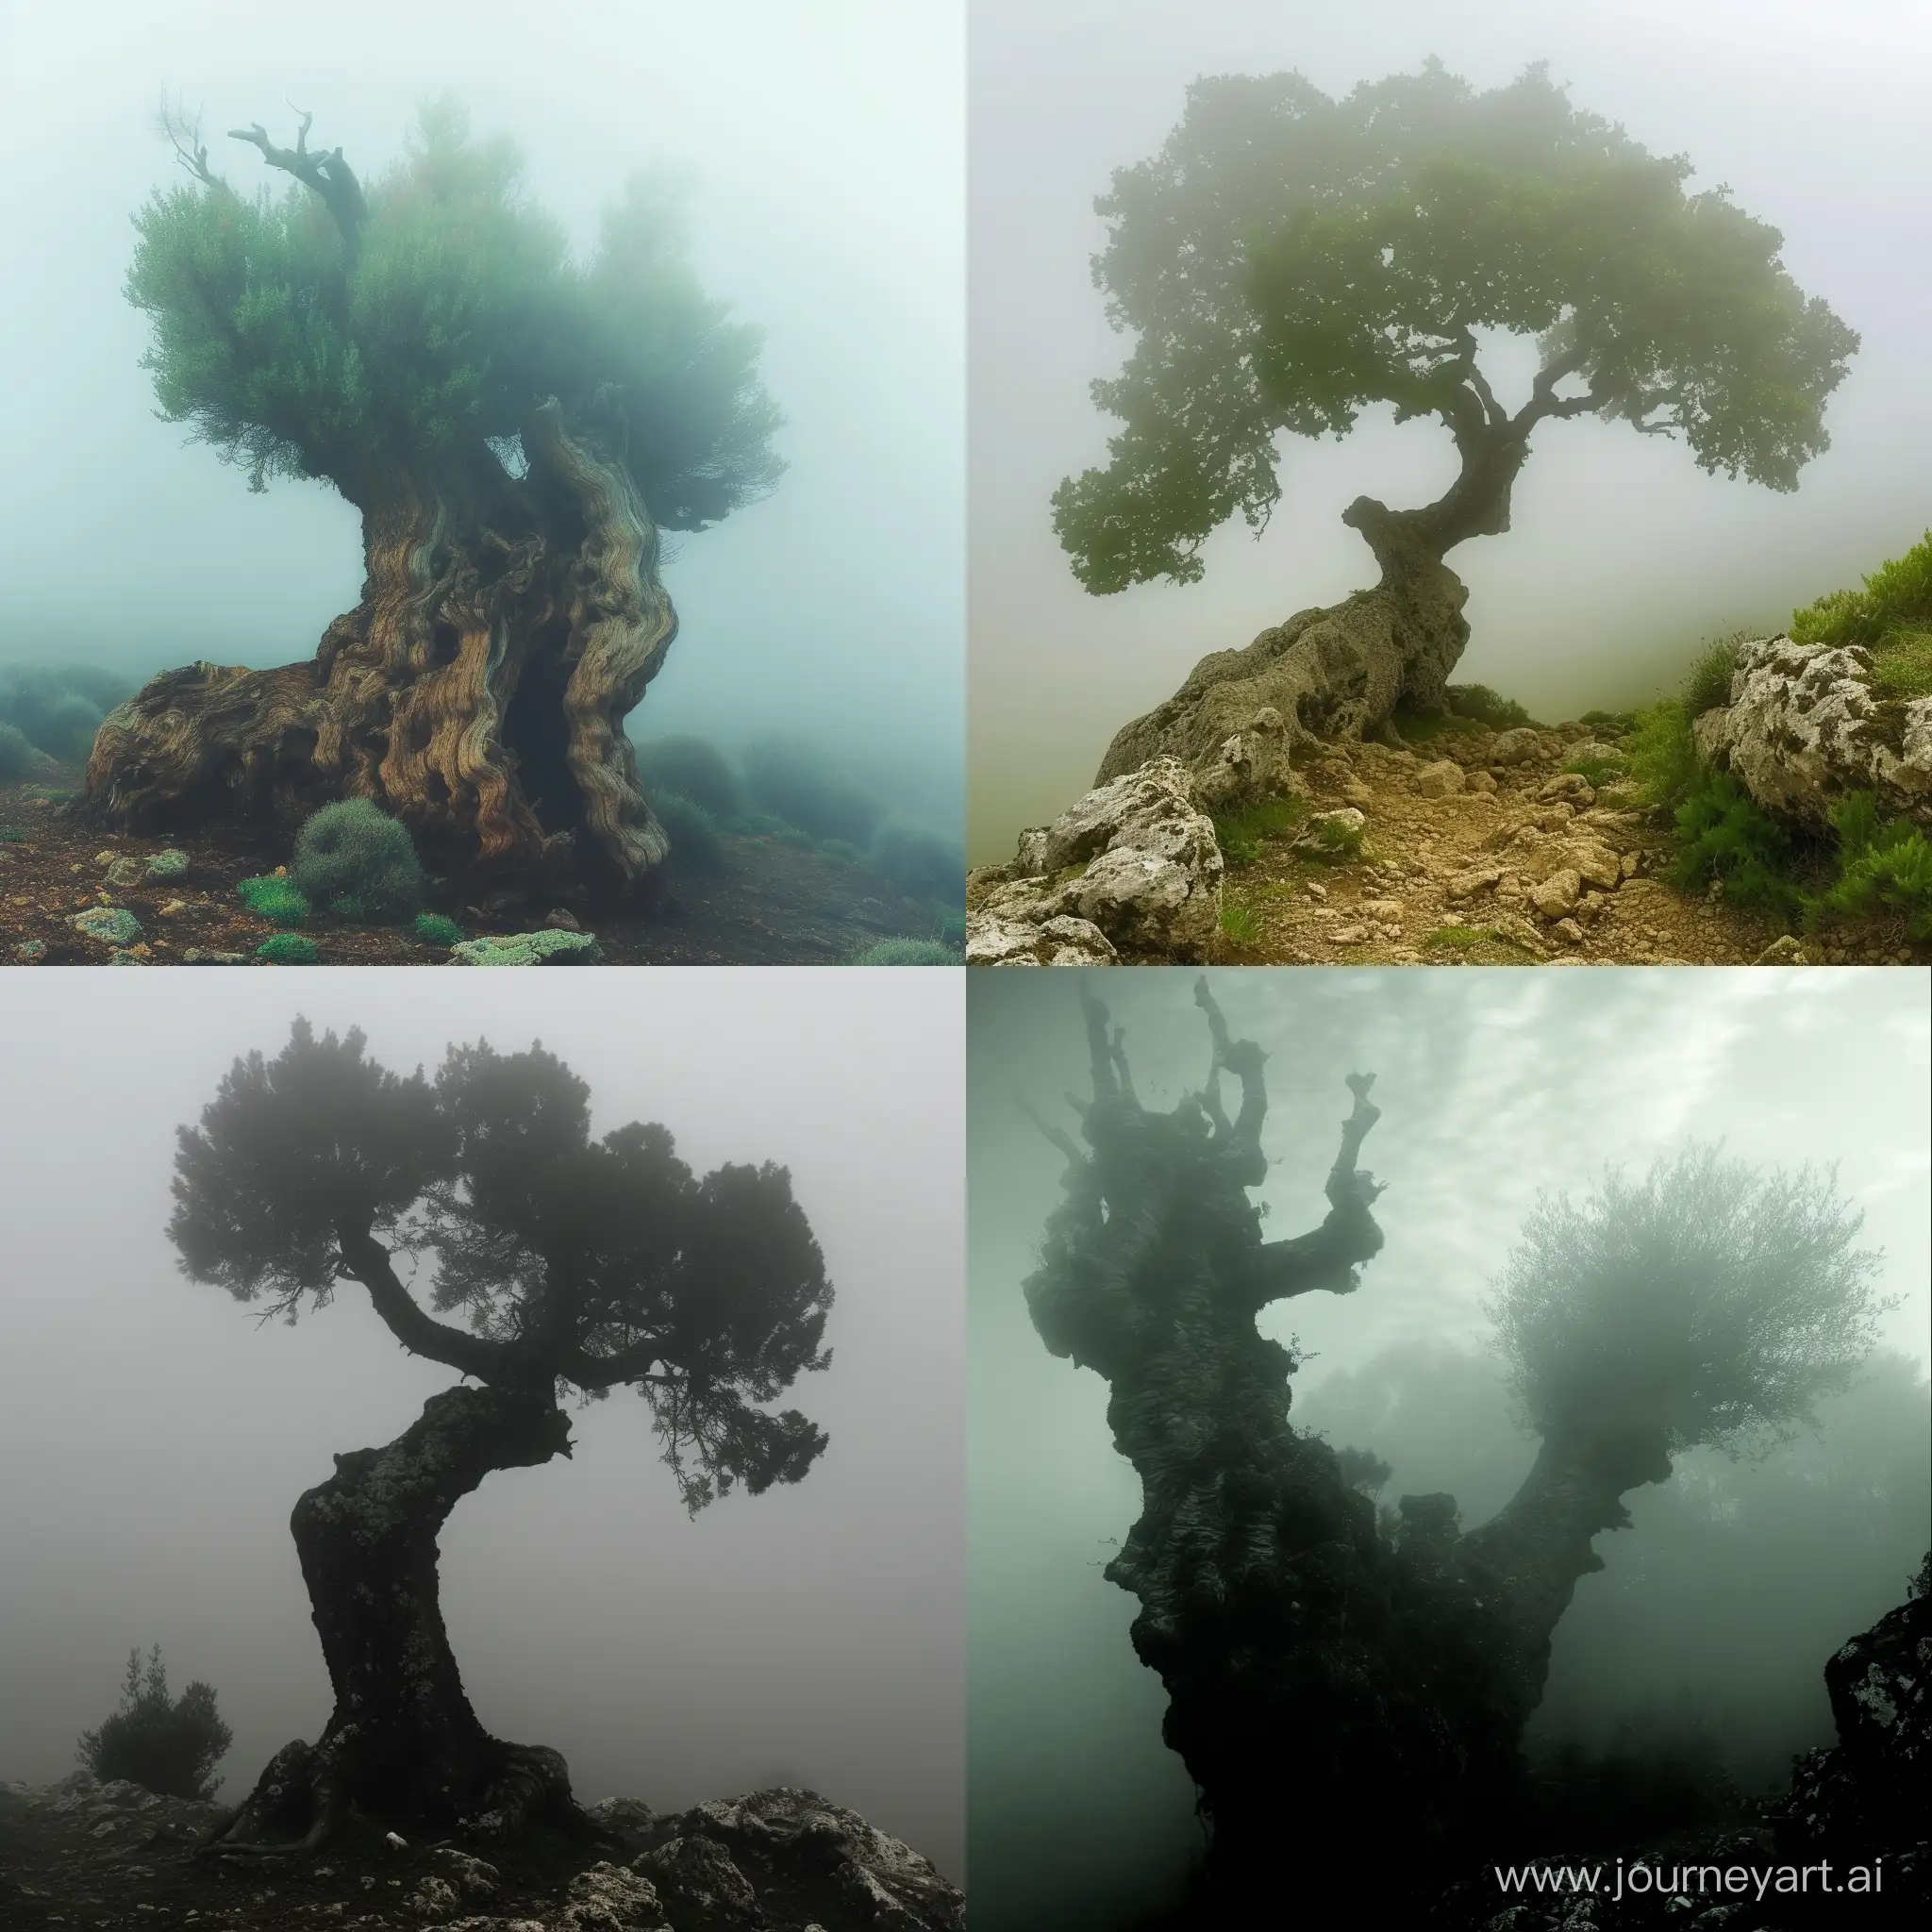 The image of a thousand-year-old tree is foggy.